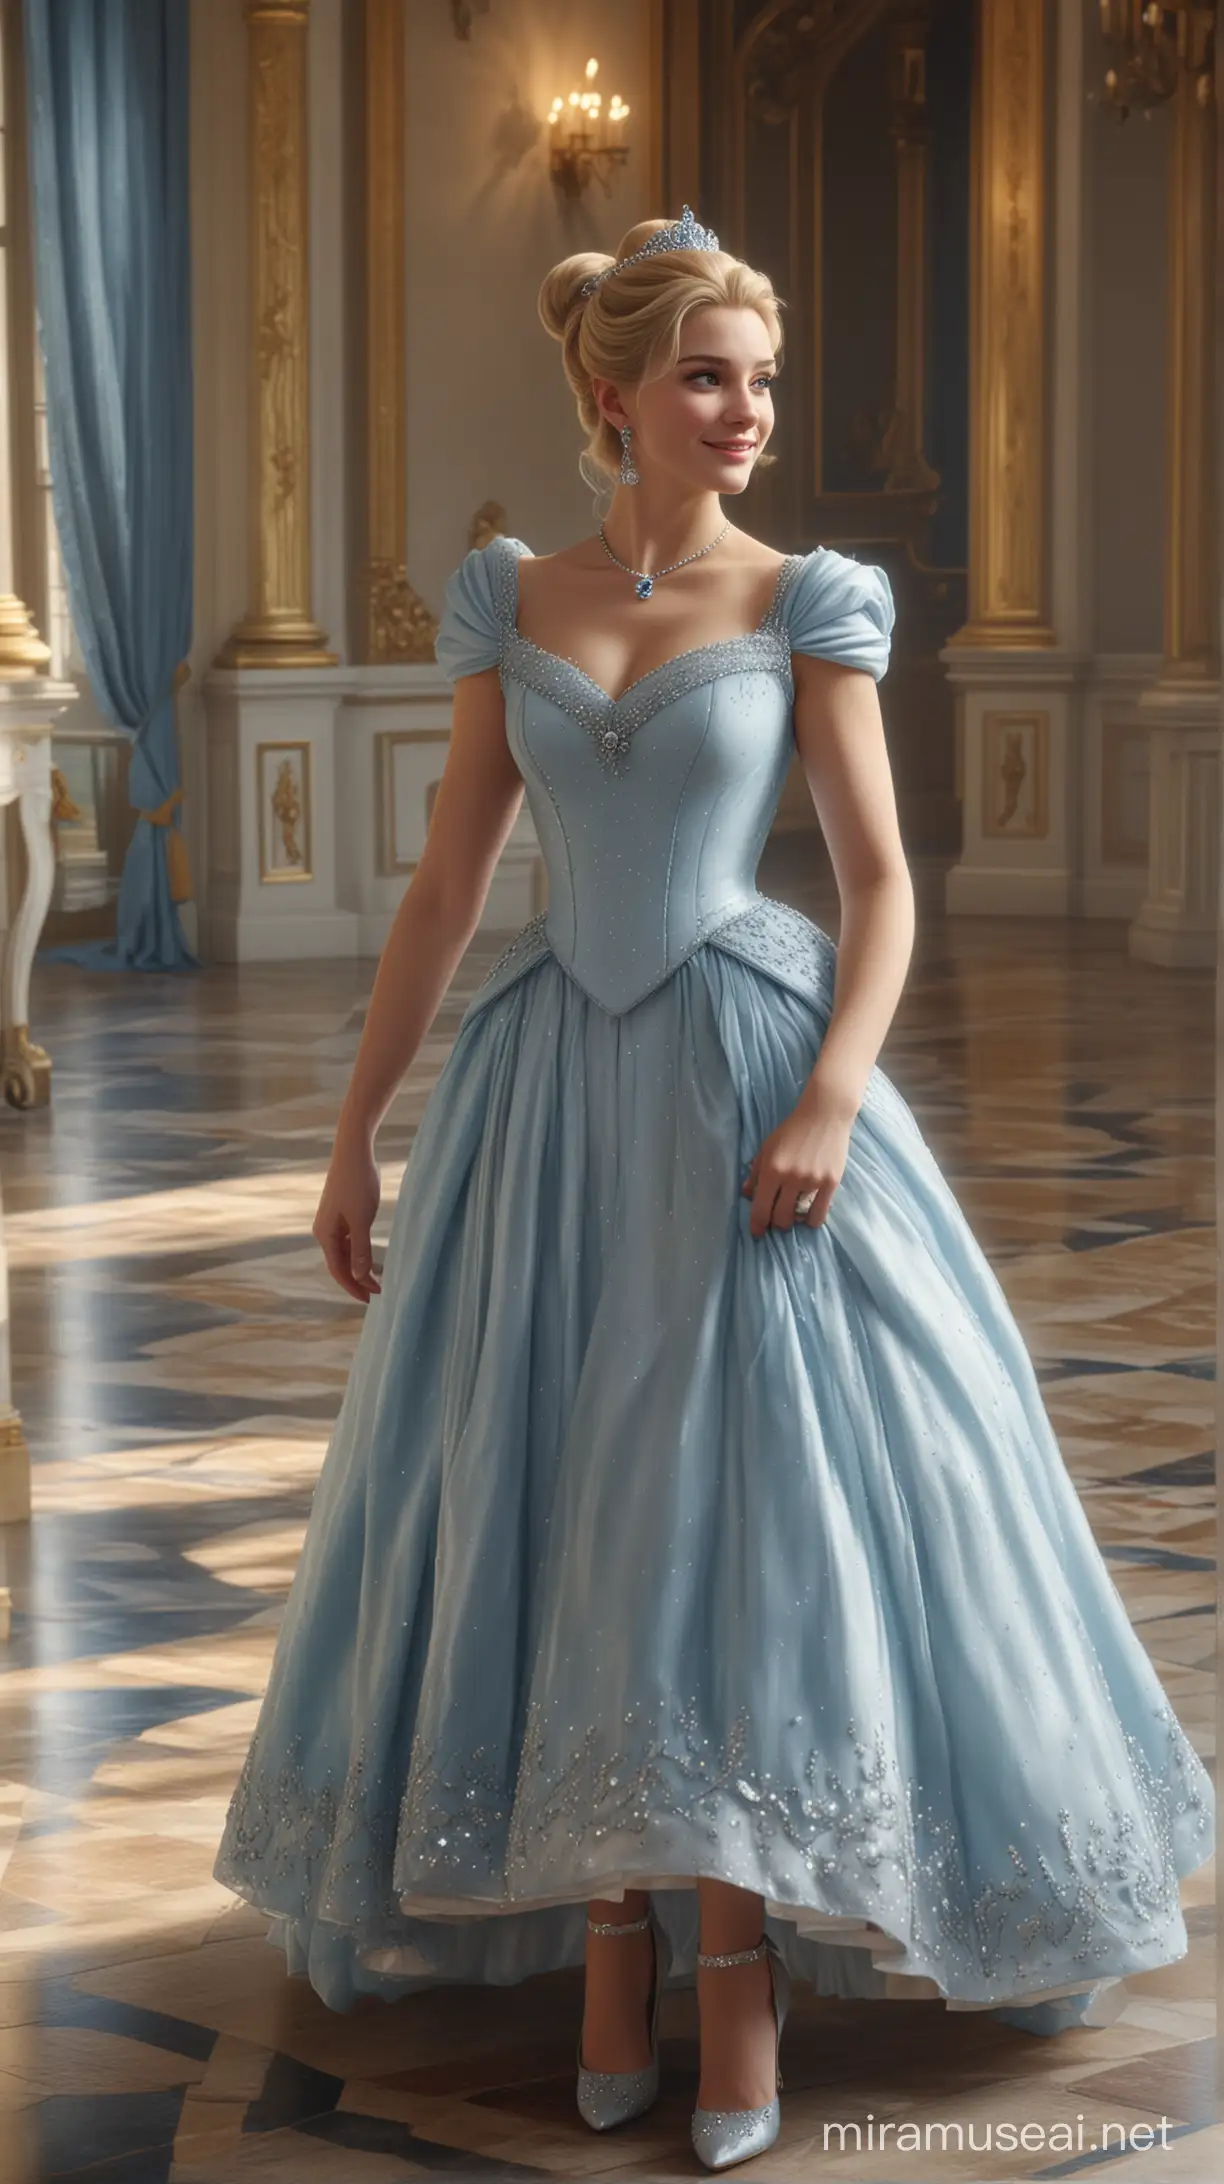 Seen from the front is a beautiful Cinderella with blonde hair in a bun, wearing earrings and a diamond necklace with a realistic face smiling gently, wearing a long, short-sleeved blue and white dress. Inside the palace, a handsome prince came and knelt down to put clear glass heels on Cinderella's feet.ultra hd.hyperrealistic.cinematic